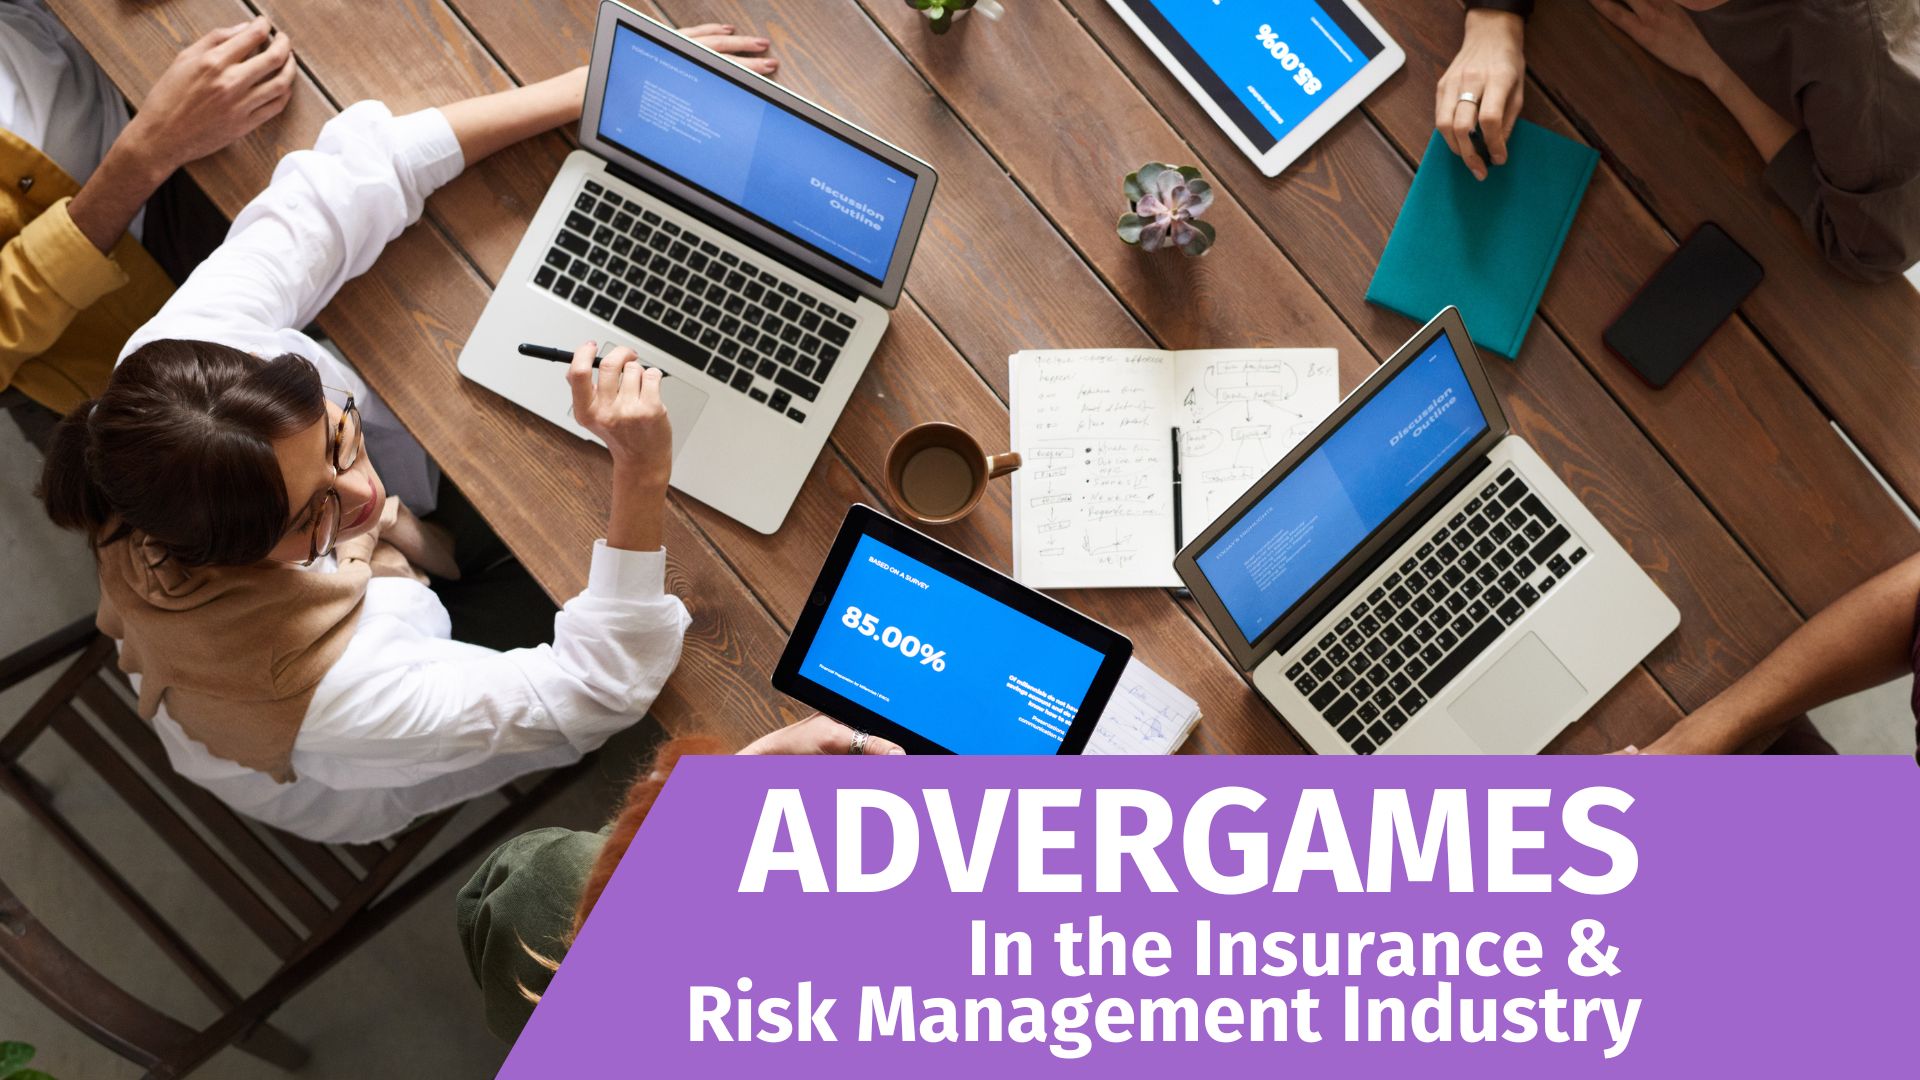 Advergames in the Insurance and Risk Management Industry